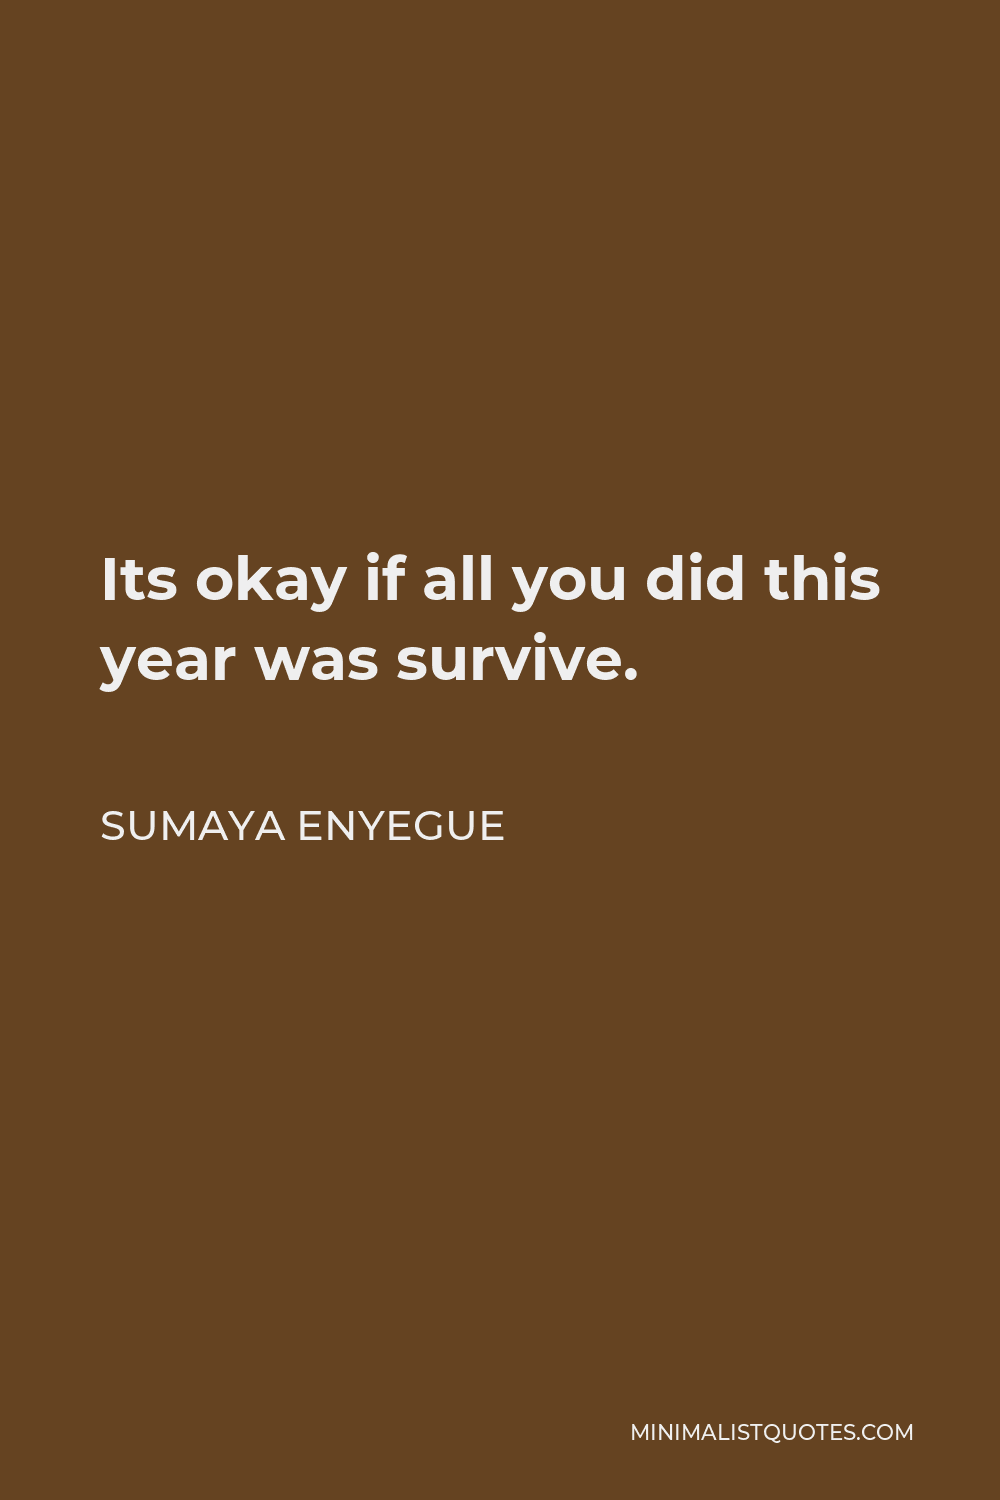 Sumaya Enyegue Quote - Its okay if all you did this year was survive.